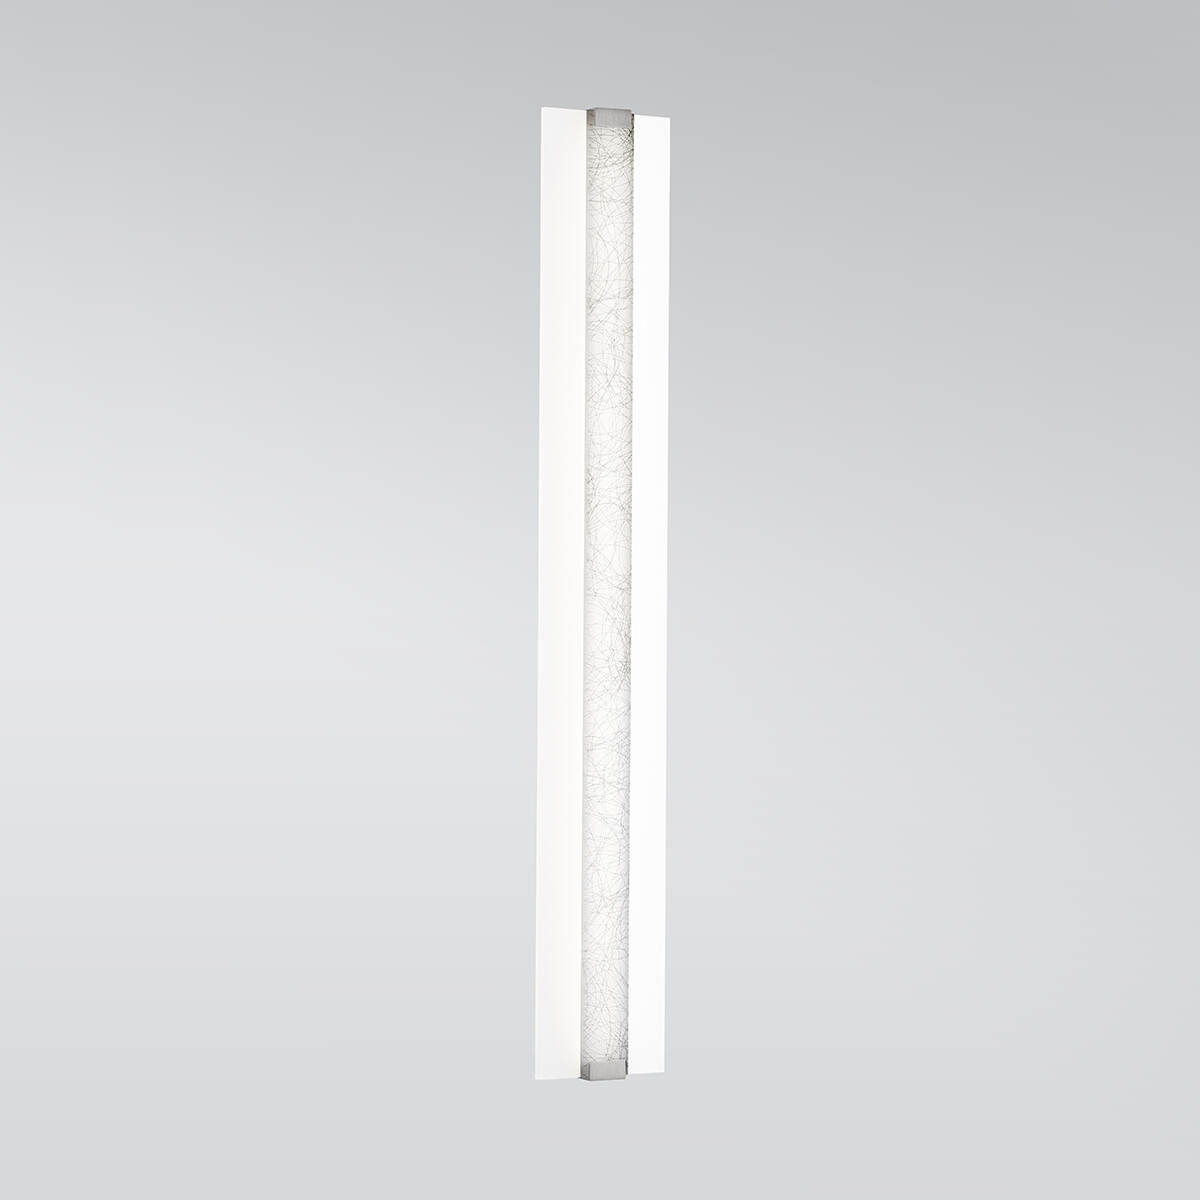 A flat linear wall sconce with a thin, luminous body 